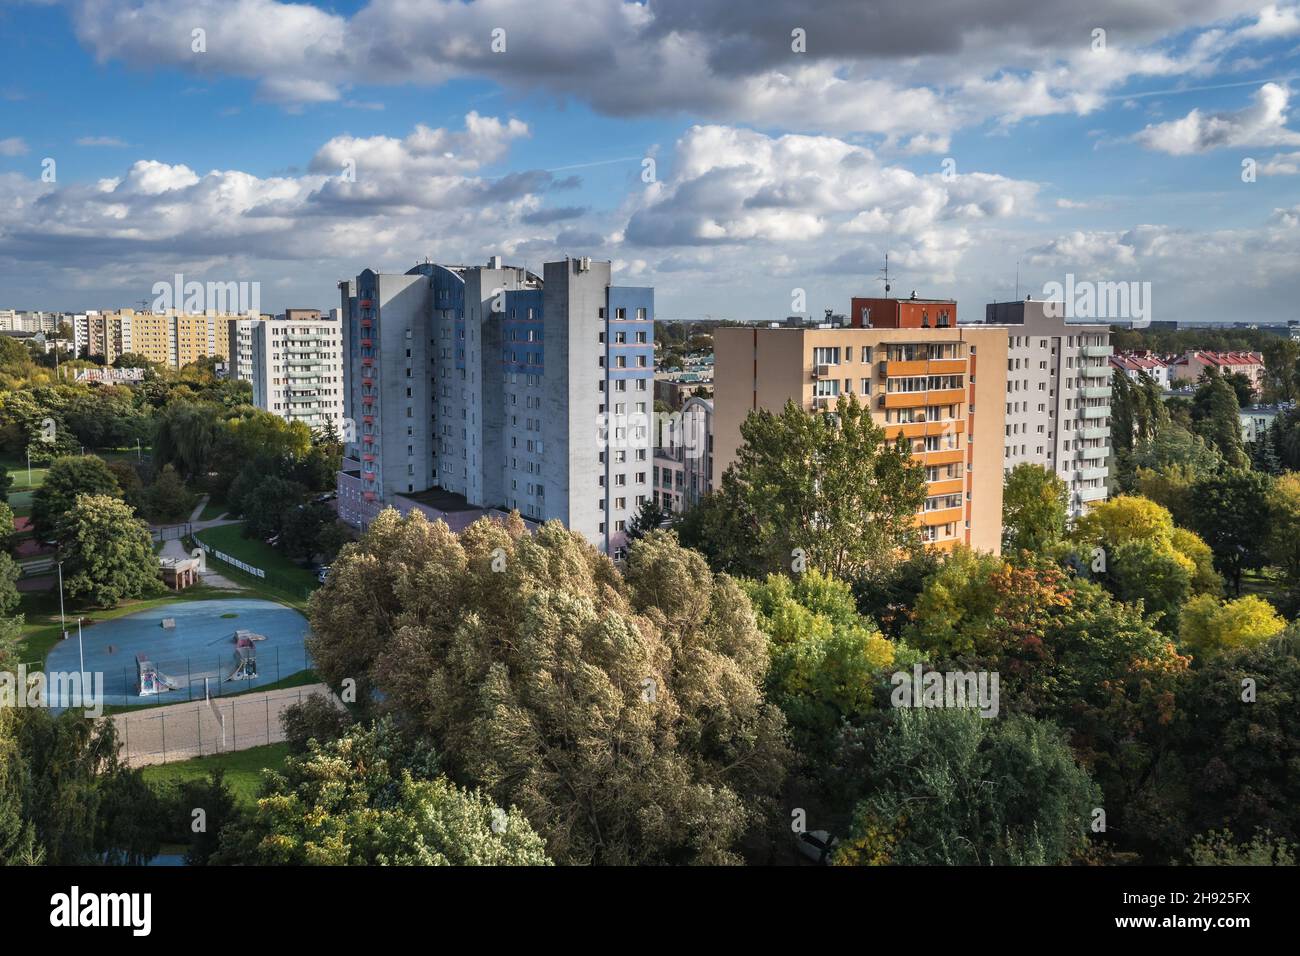 Residential buildings on the edge of Wlochy and Ochota districts of Warsaw city, Poland Stock Photo